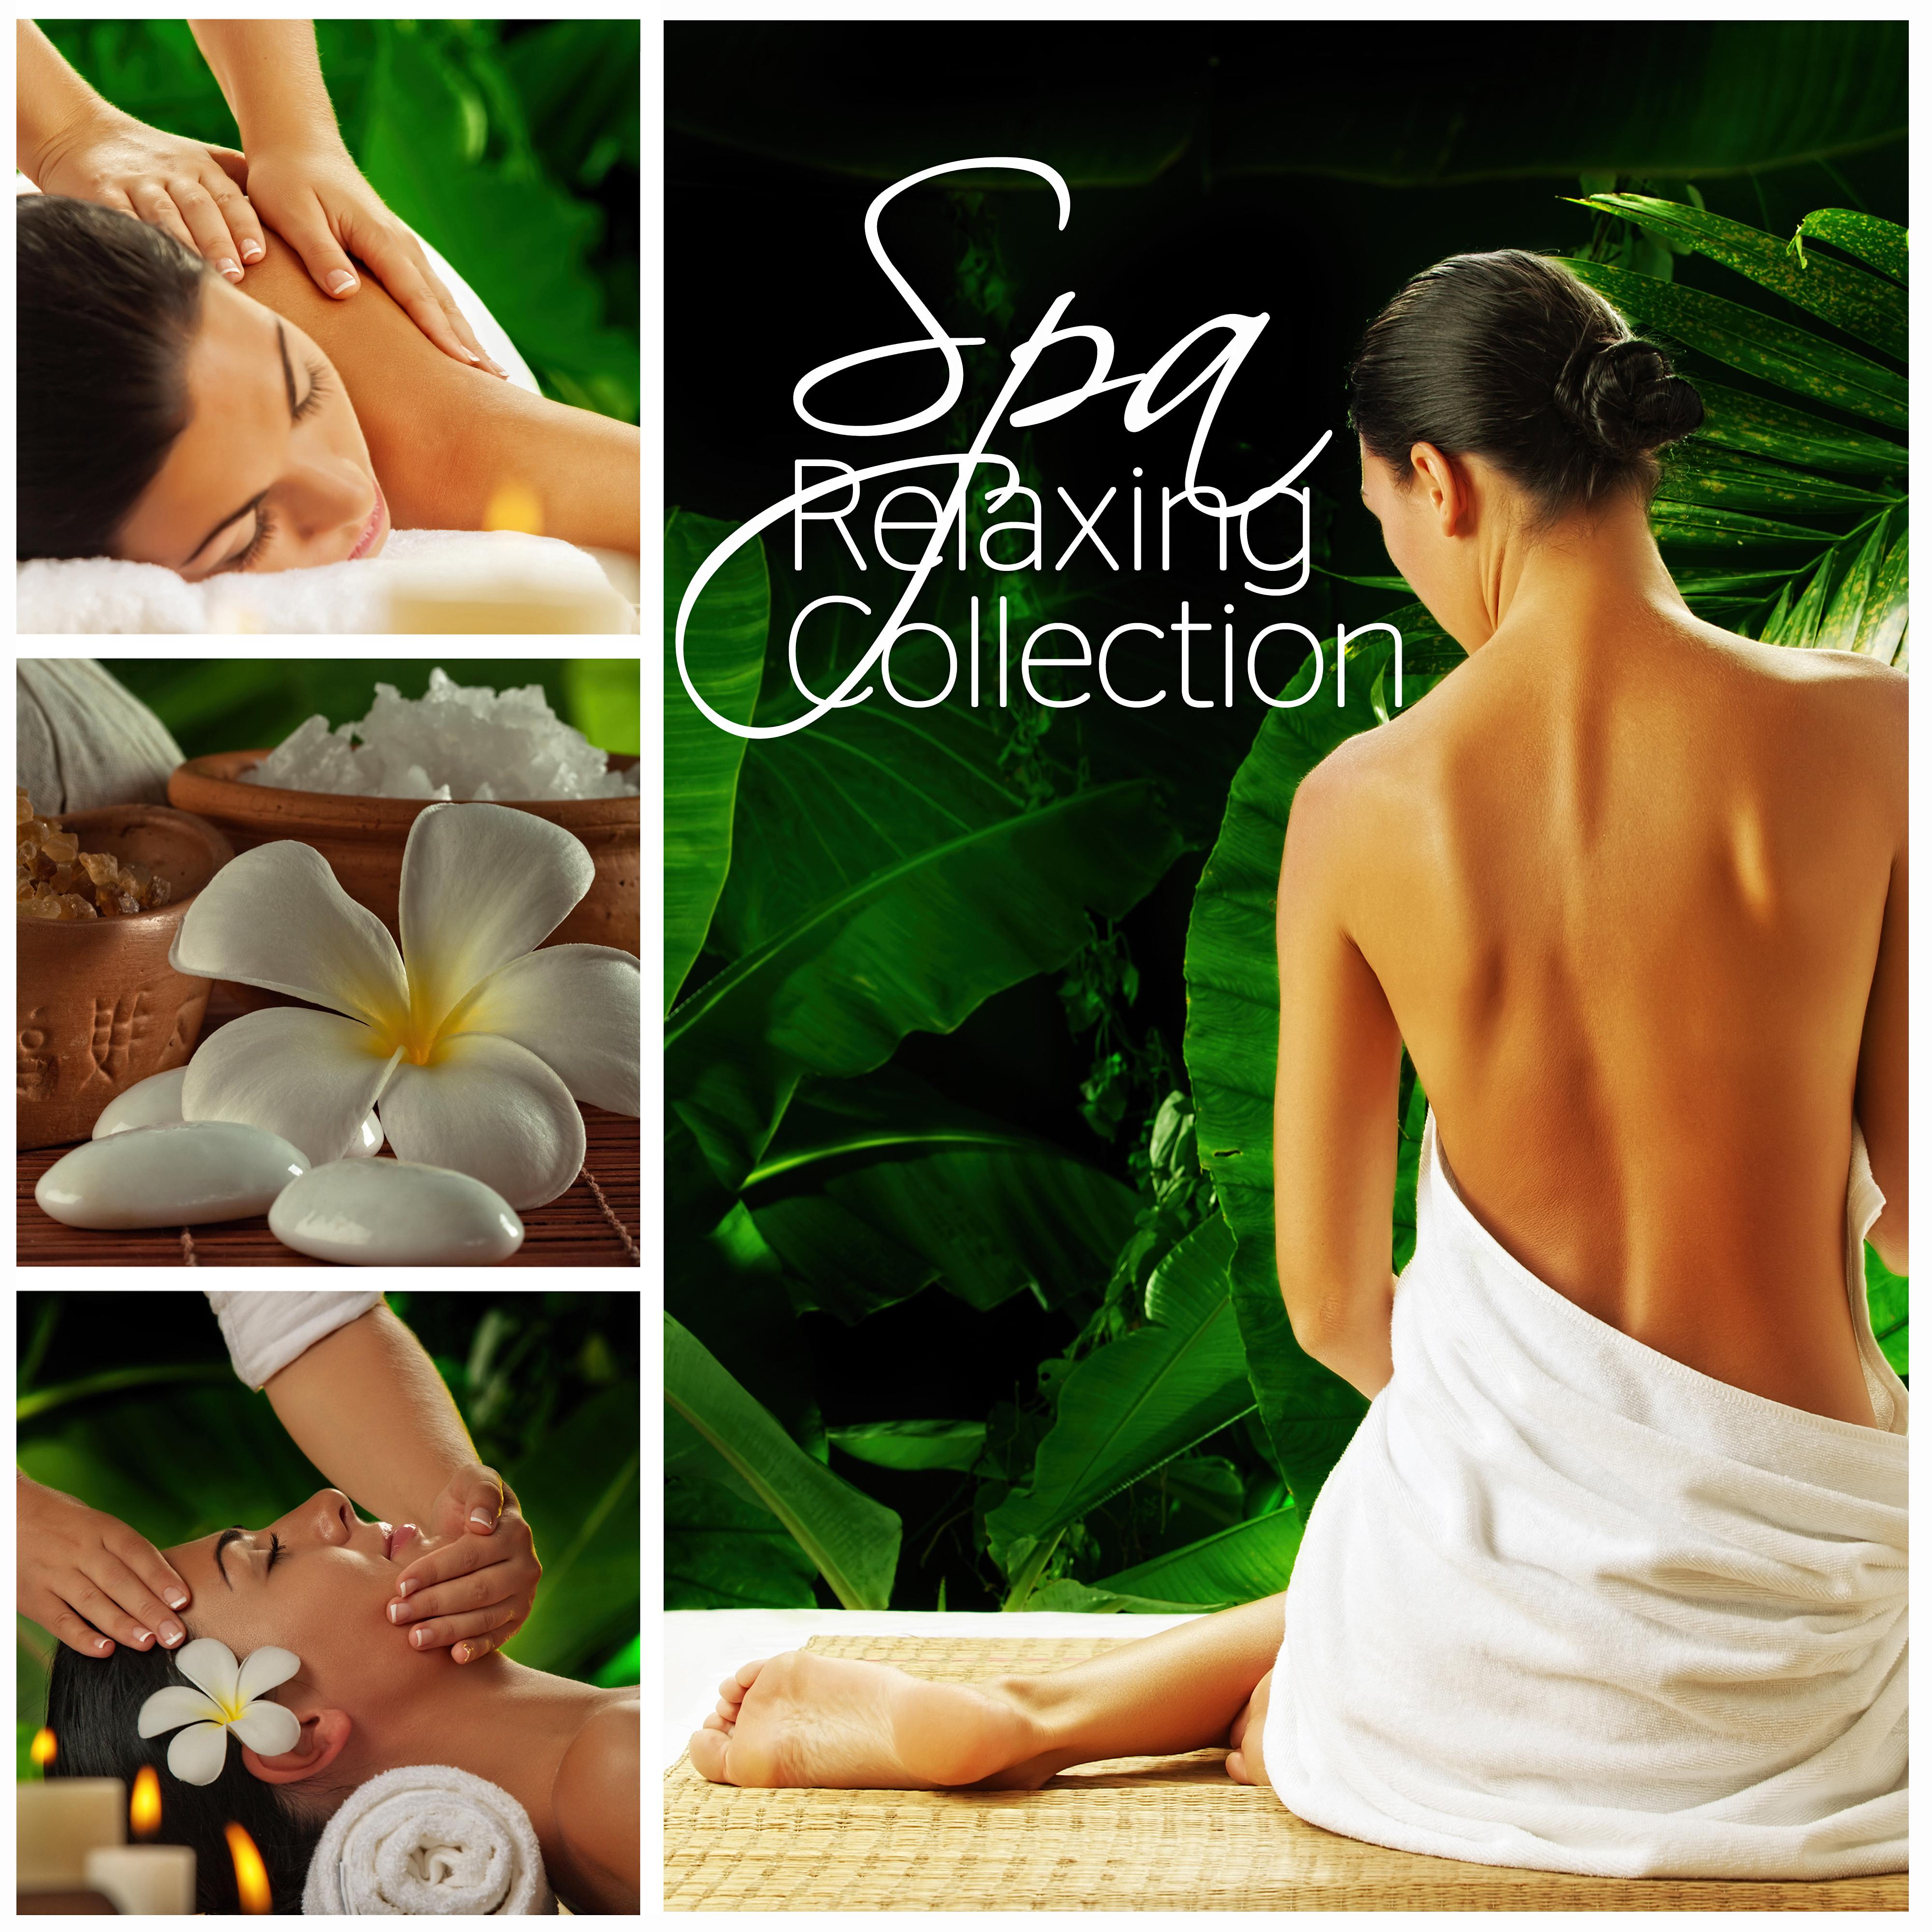 Spa Relaxing Collection  Bliss Spa, Time for Me, Easy Listening, Nature Sounds, Calm Down, Gentle Ambient Music